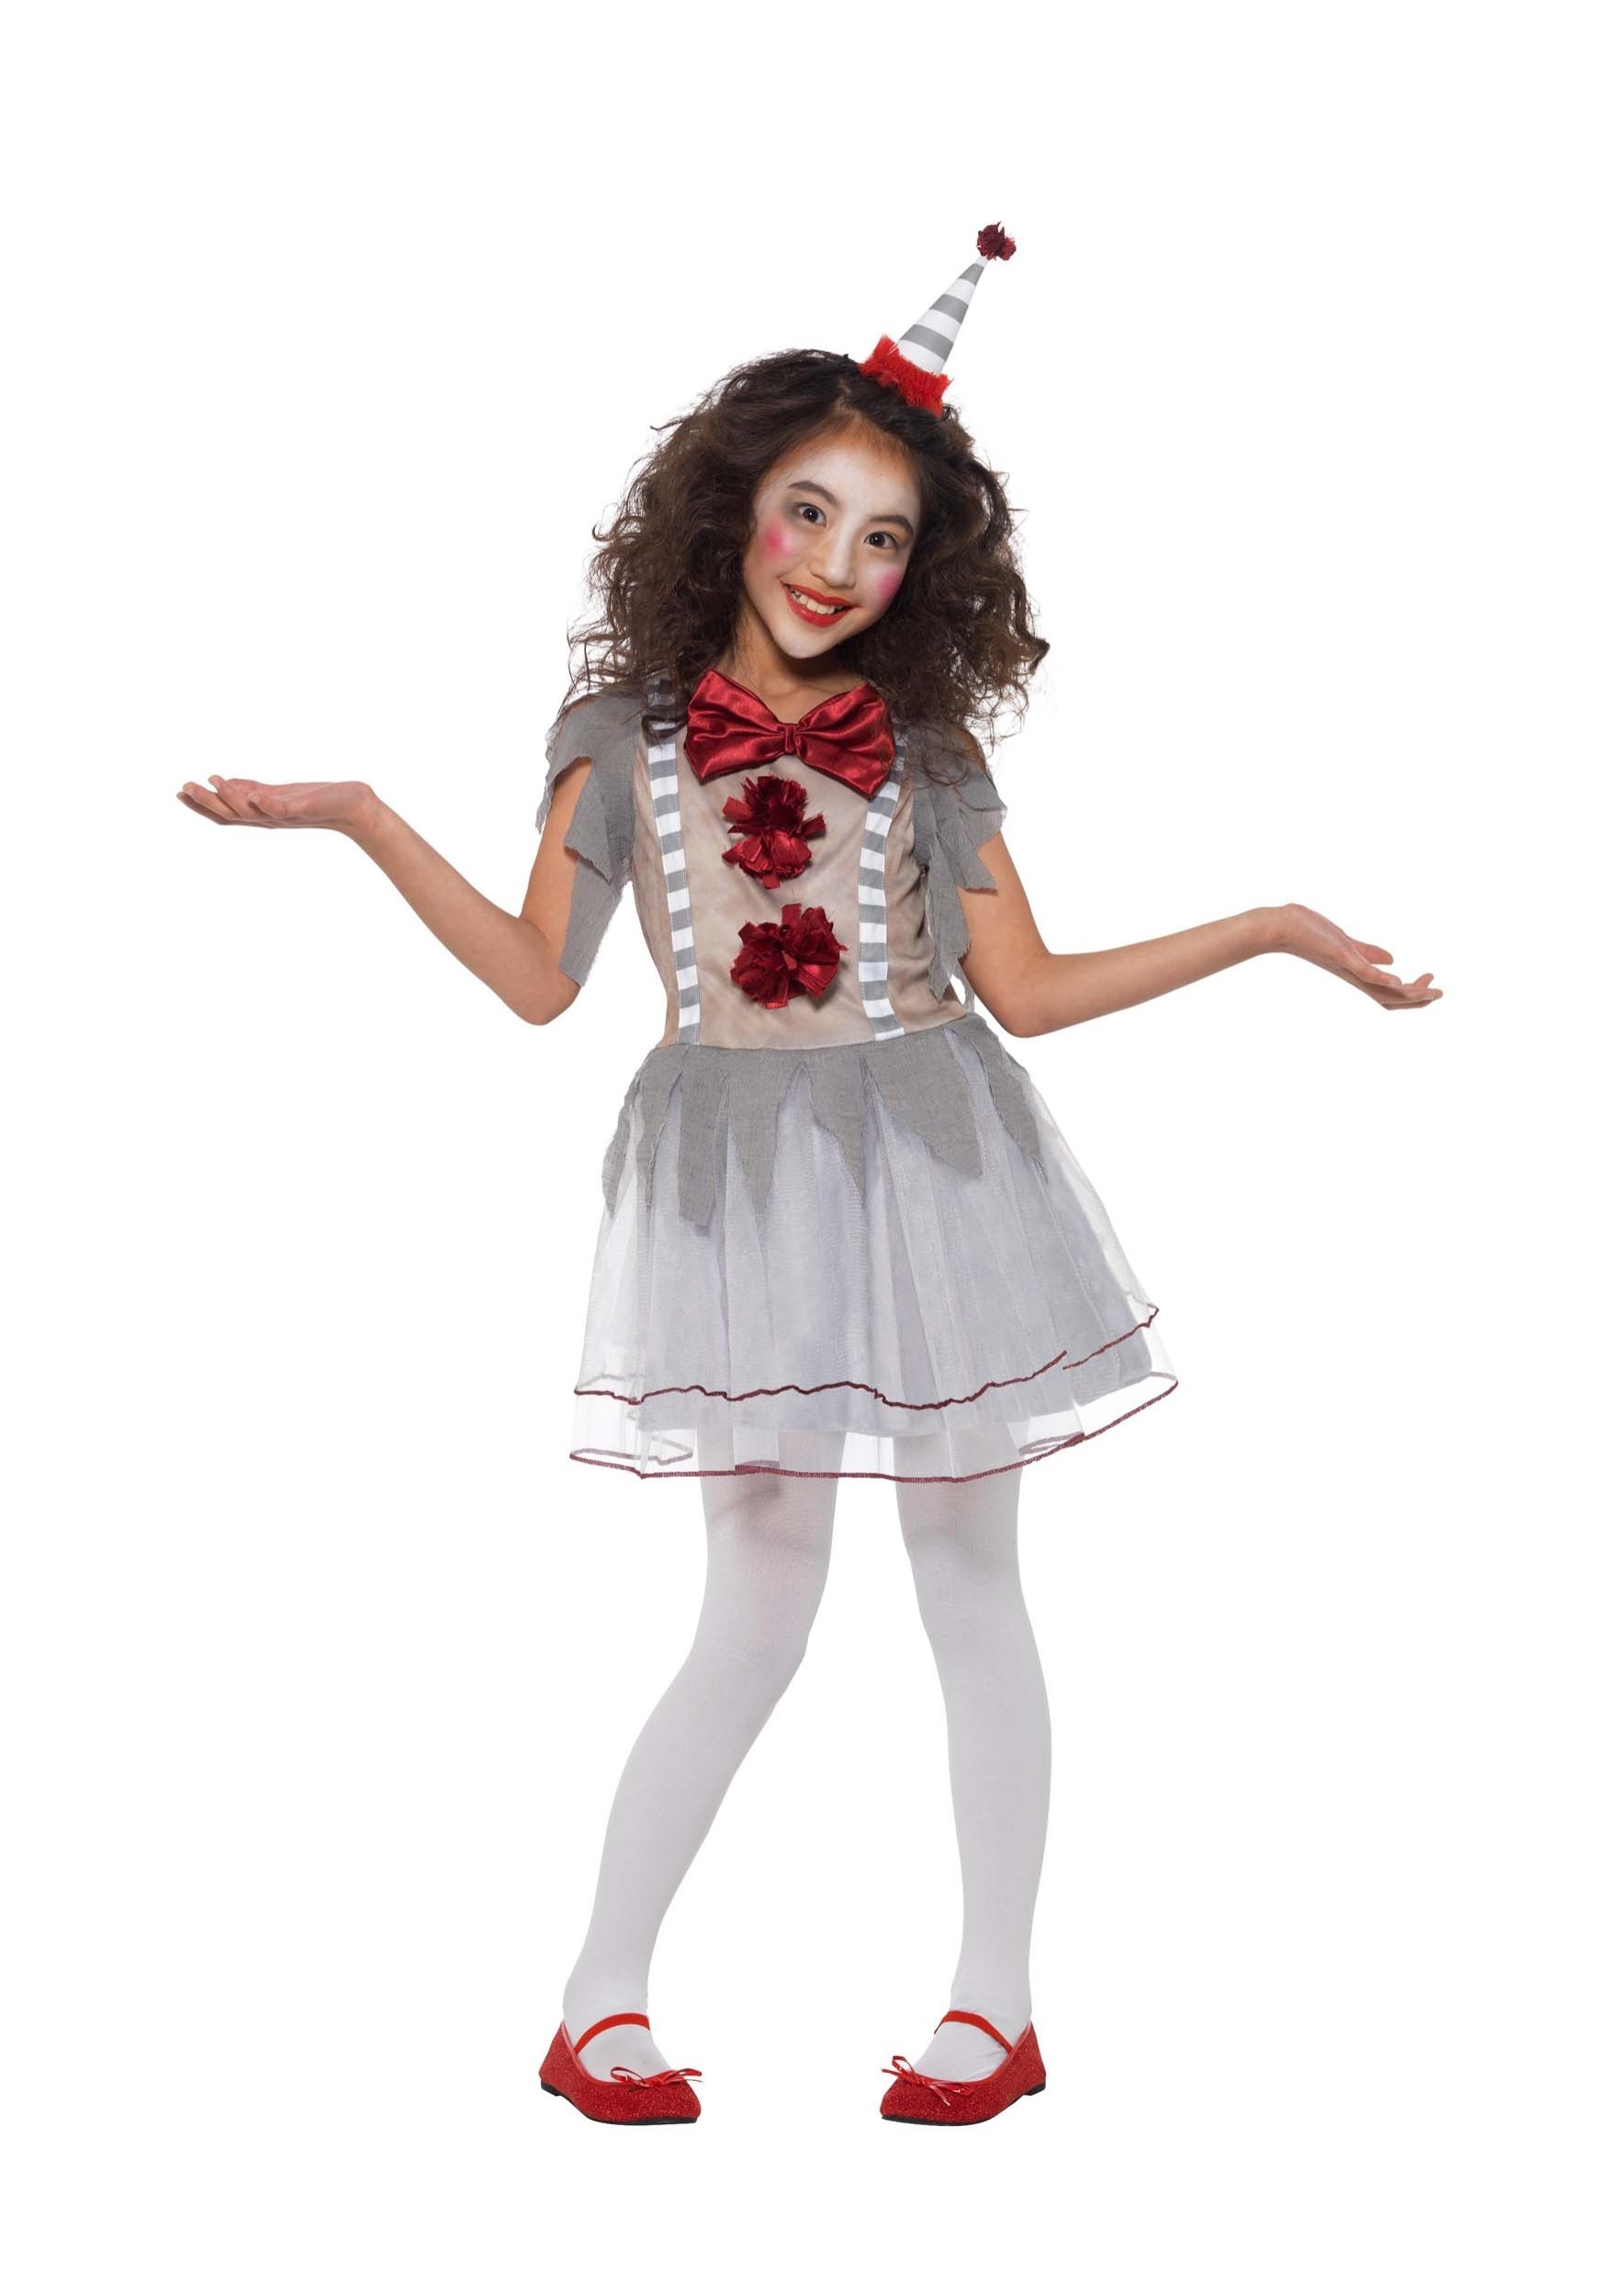 Photos - Fancy Dress Vintage Smiffys Girl's  Clown Costume Red/Gray/Brown SM49825S 